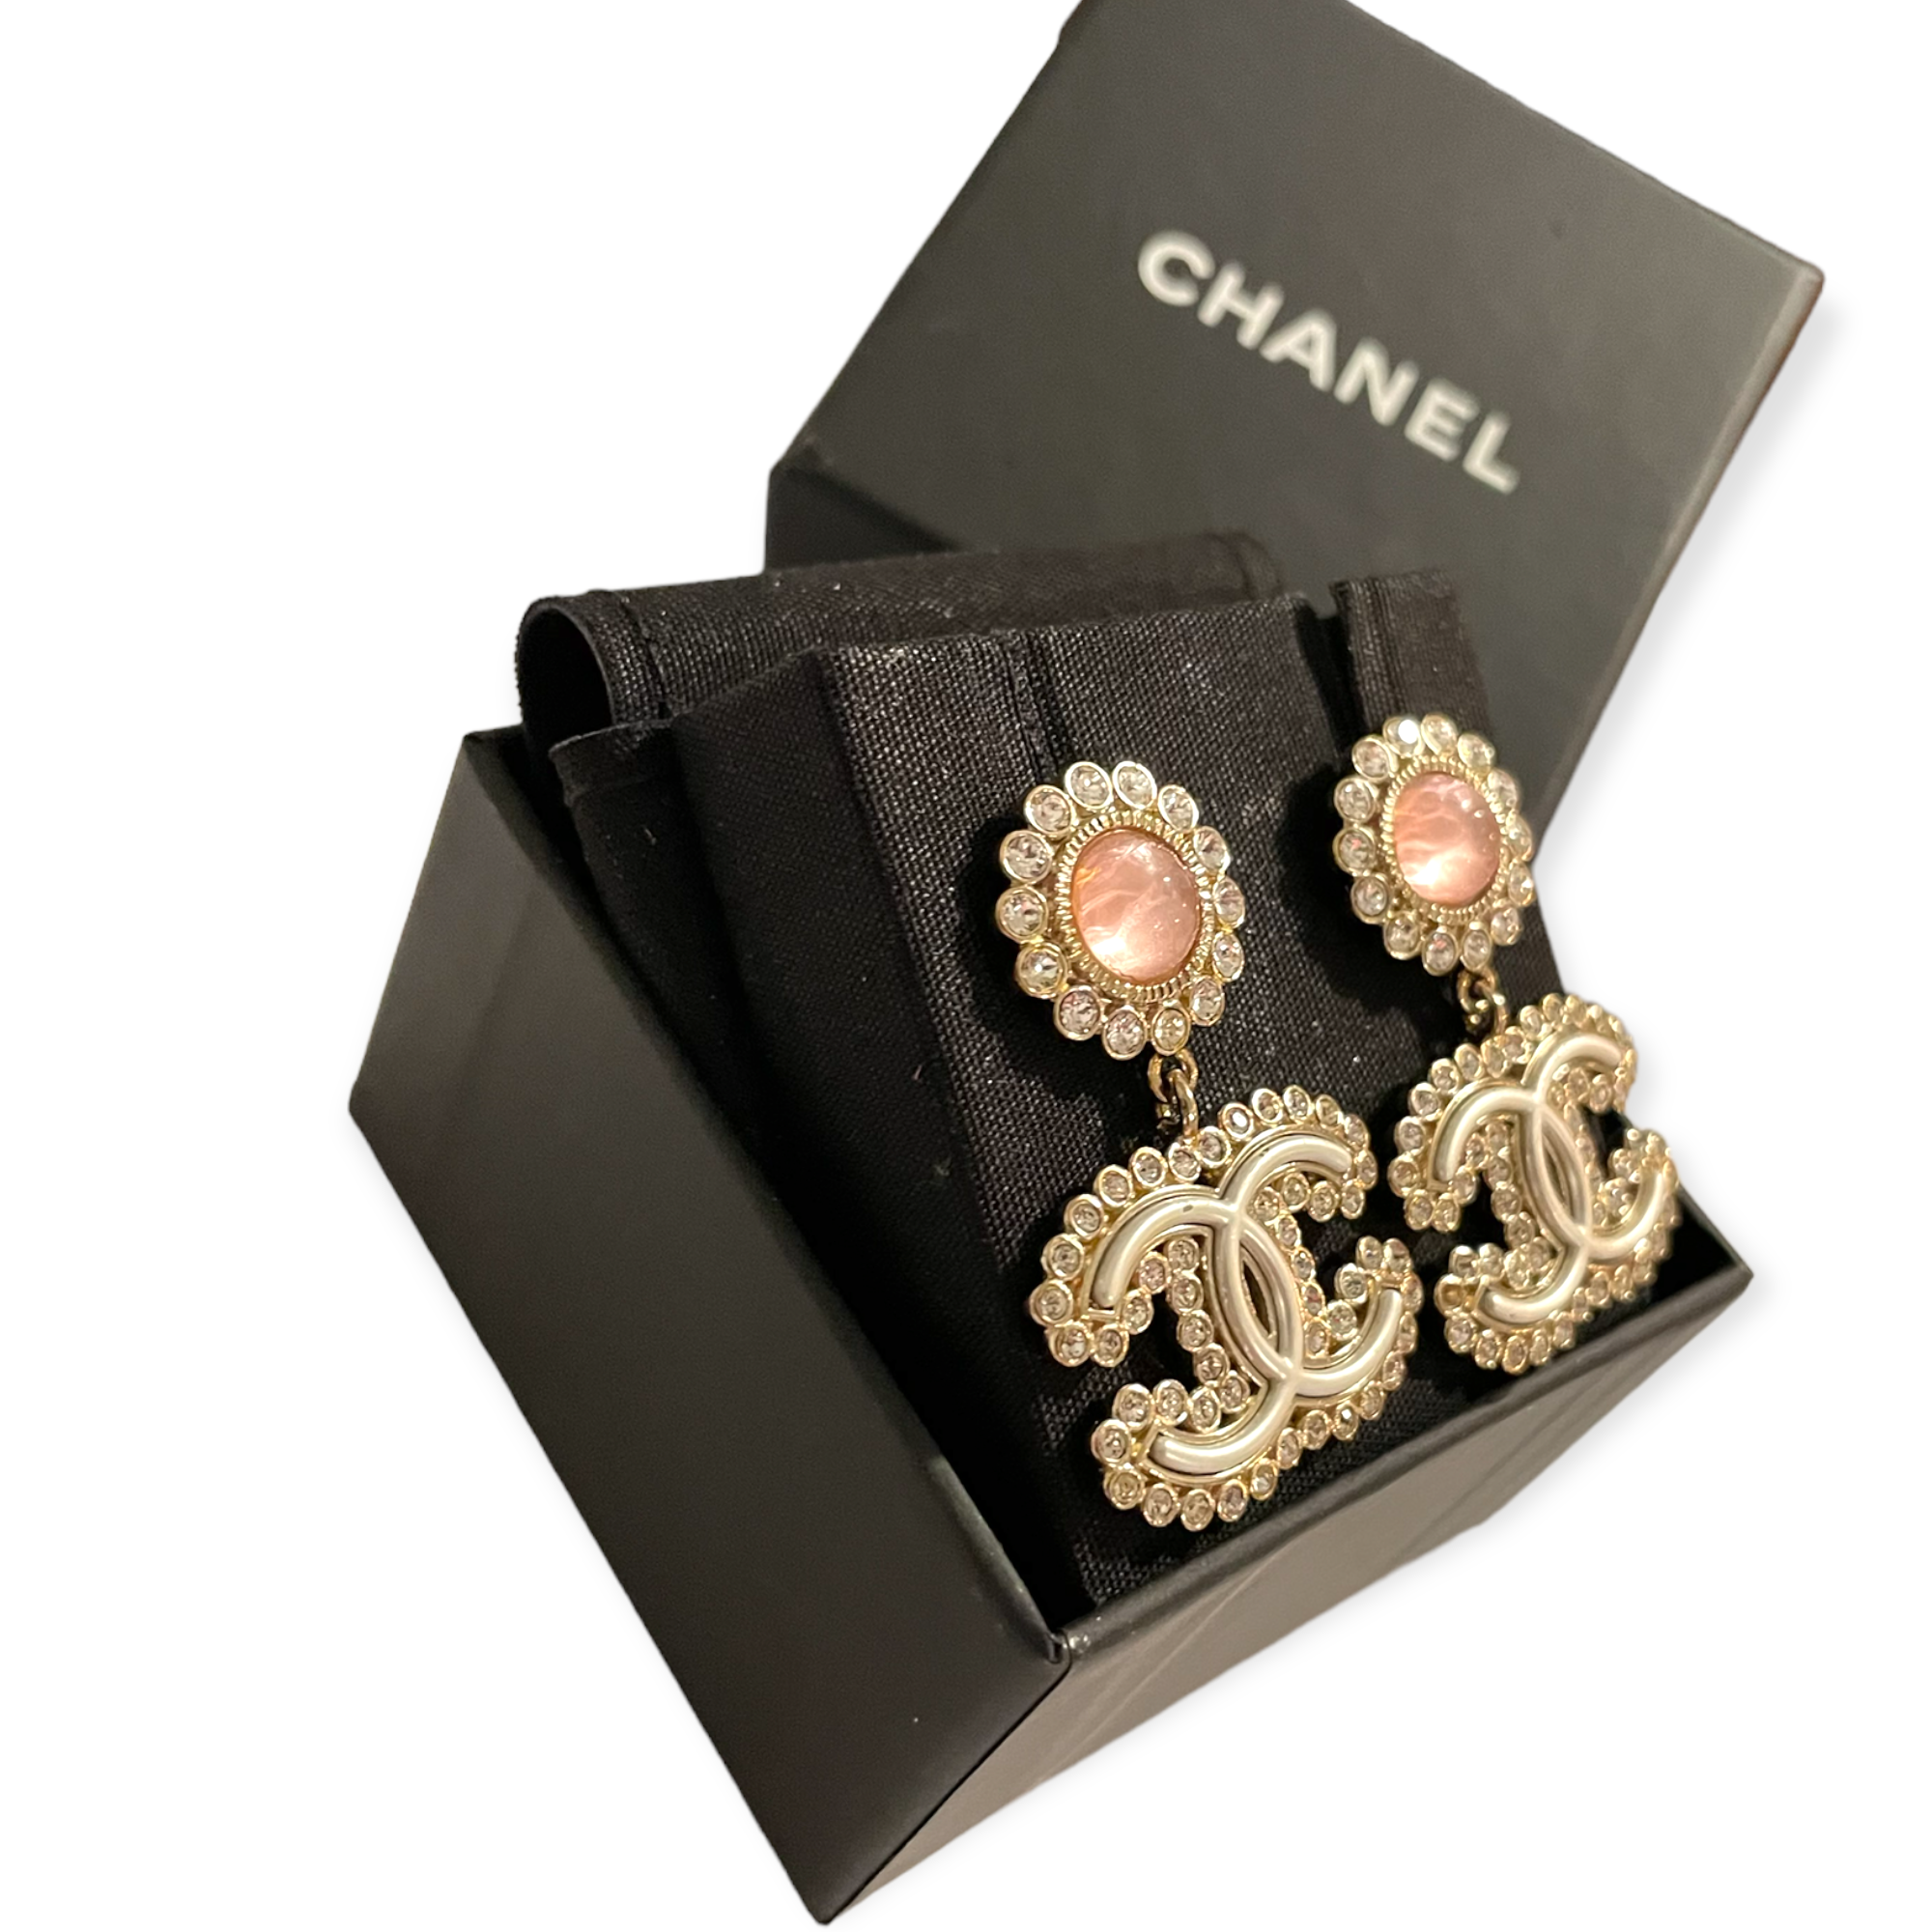 CHANEL Crystal CC Logo Drop with Pink Resin & Crystal Stud Dangling Earrings